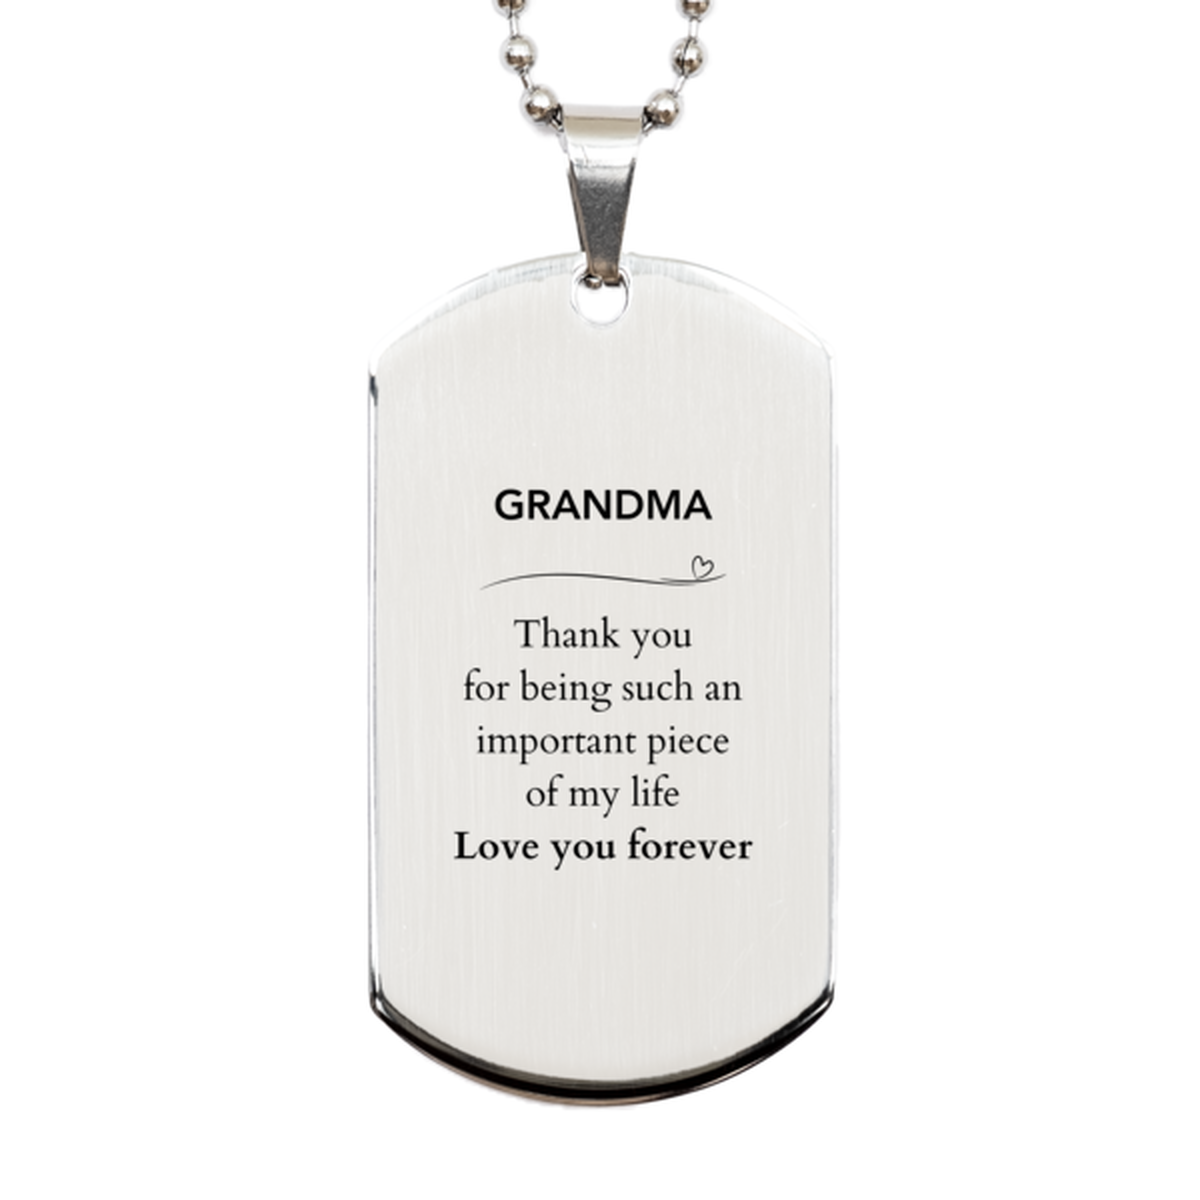 Appropriate Grandma Silver Dog Tag Epic Birthday Gifts for Grandma Thank you for being such an important piece of my life Grandma Christmas Mothers Fathers Day